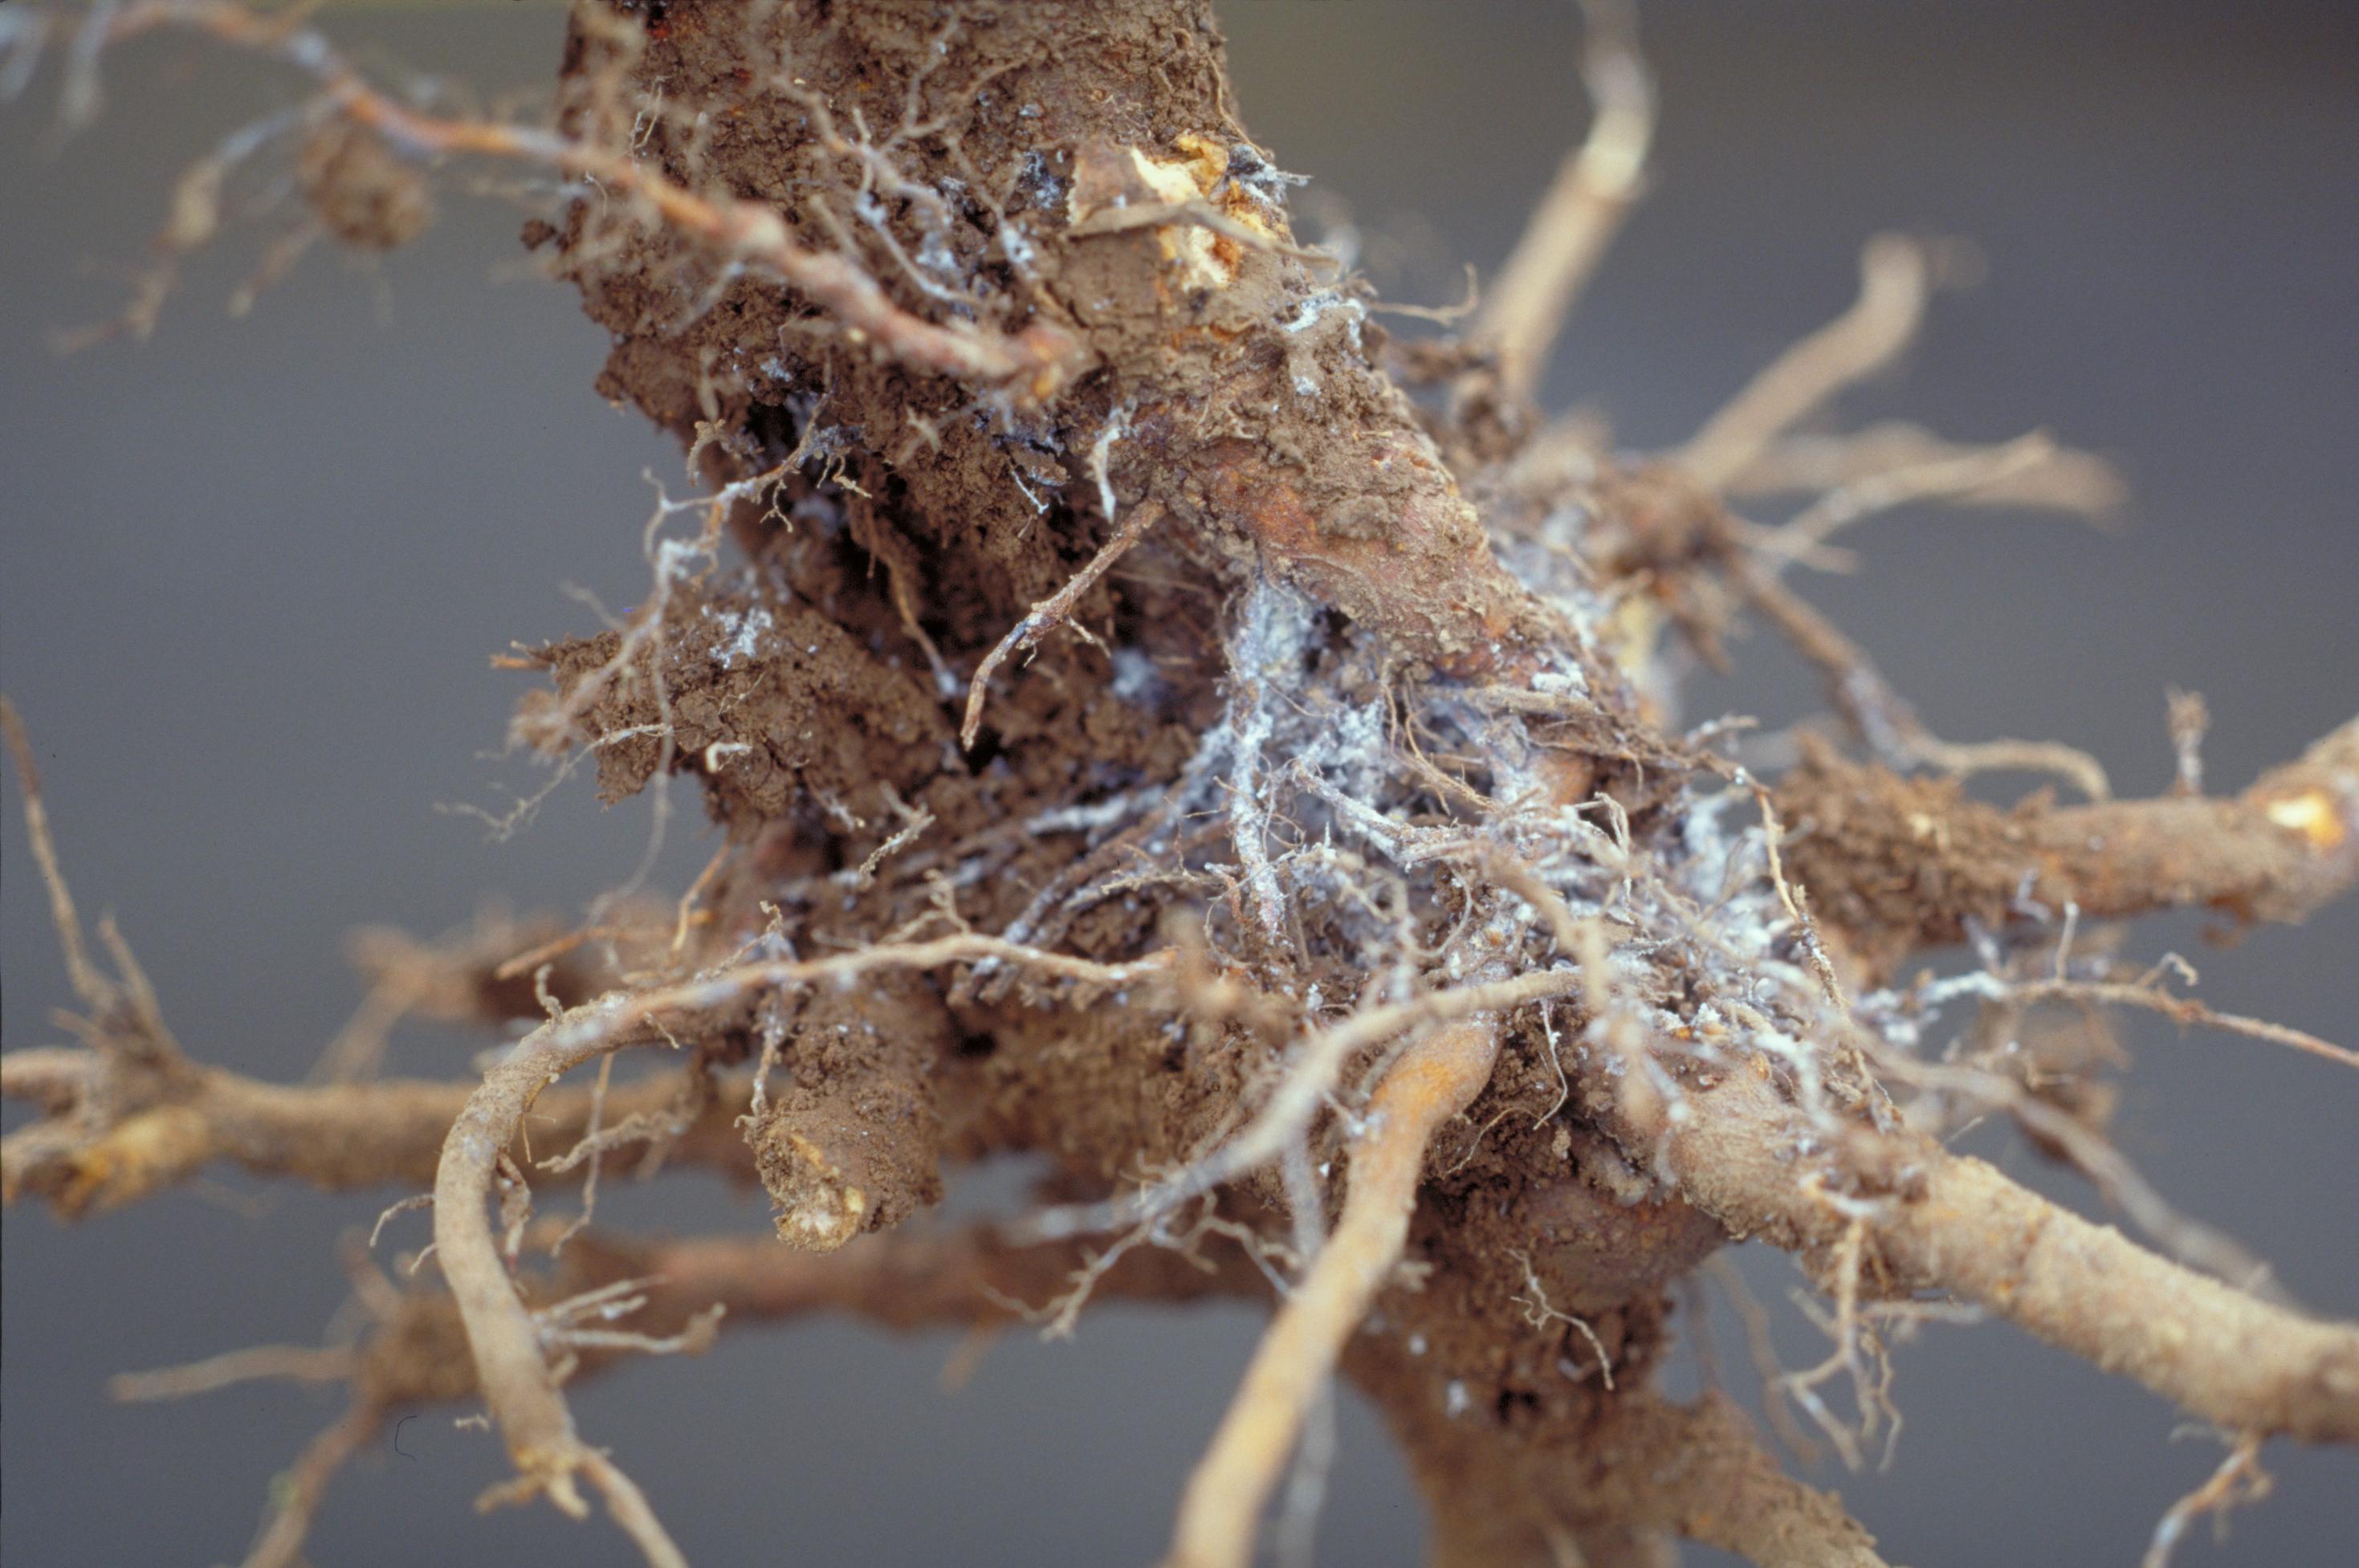 Woolly apple aphid on roots (Bessin, UKY)